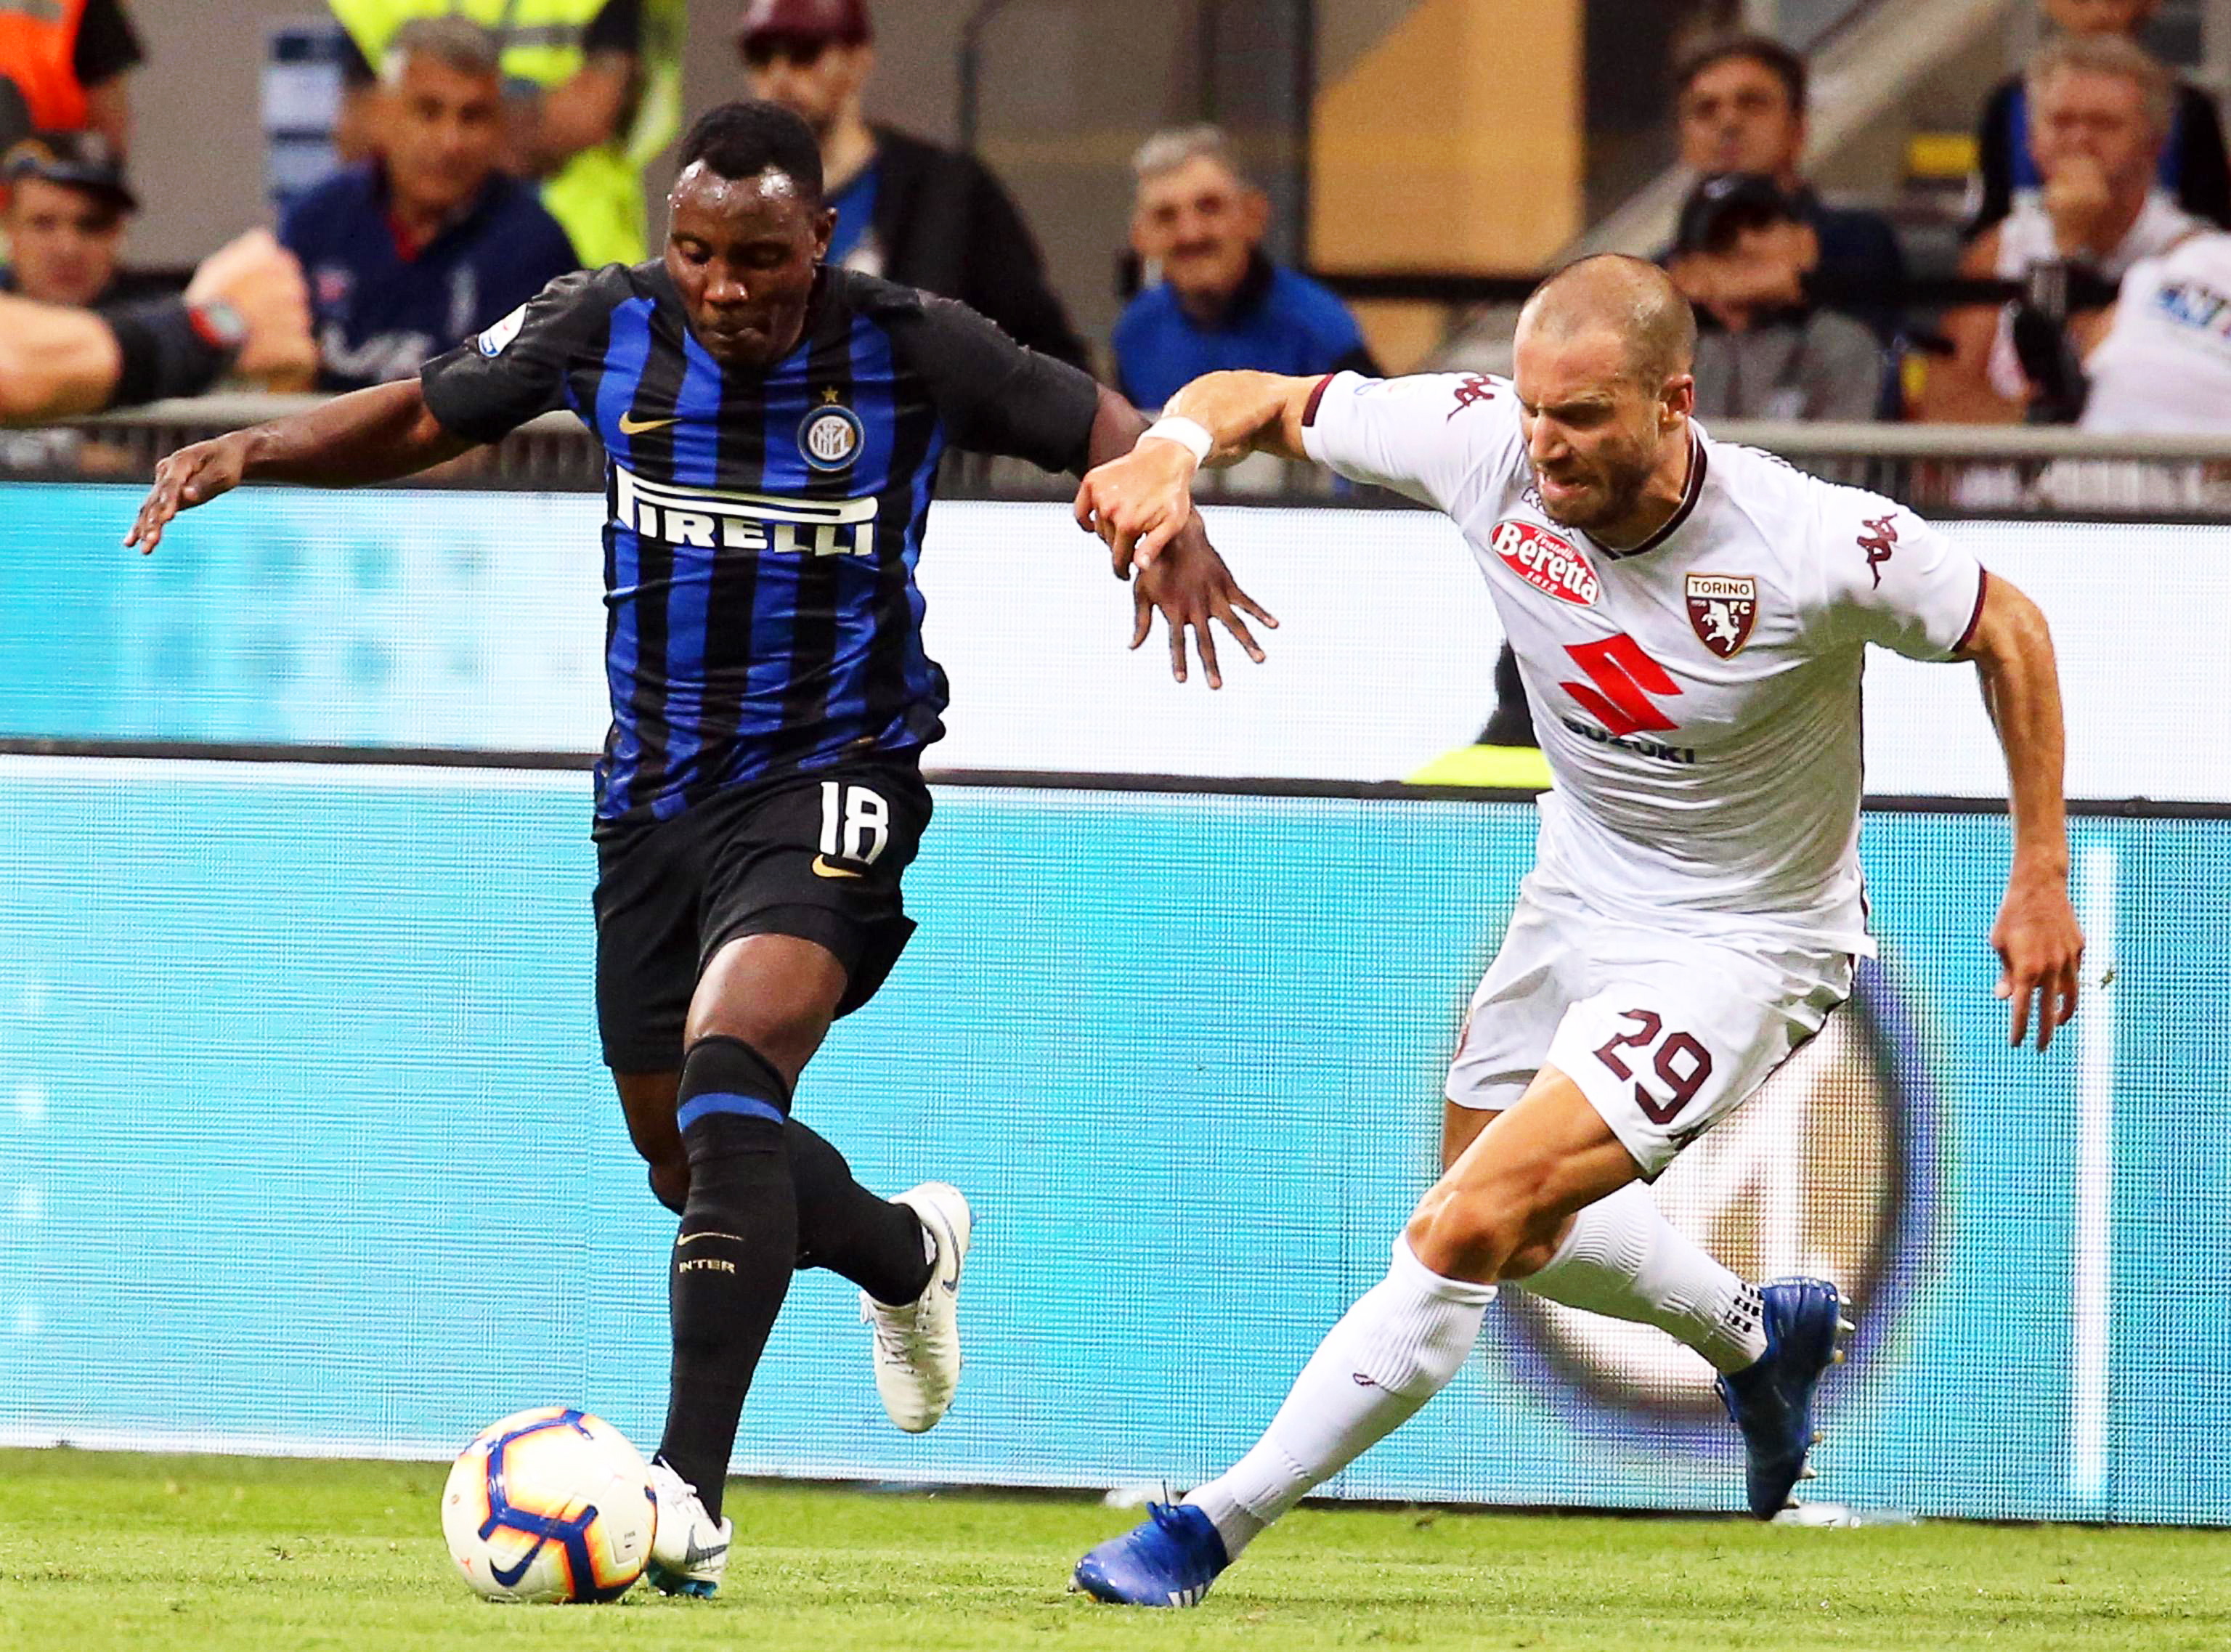 epa06975339 Inter's Kwadwo Asamoah (L) in action against Torino's Lorenzo De Silvestri (R) during the Italian Serie A soccer match between Inter Milan and Torino FC in Milan, Italy, 26 August 2018.  EPA/MATTEO BAZZI